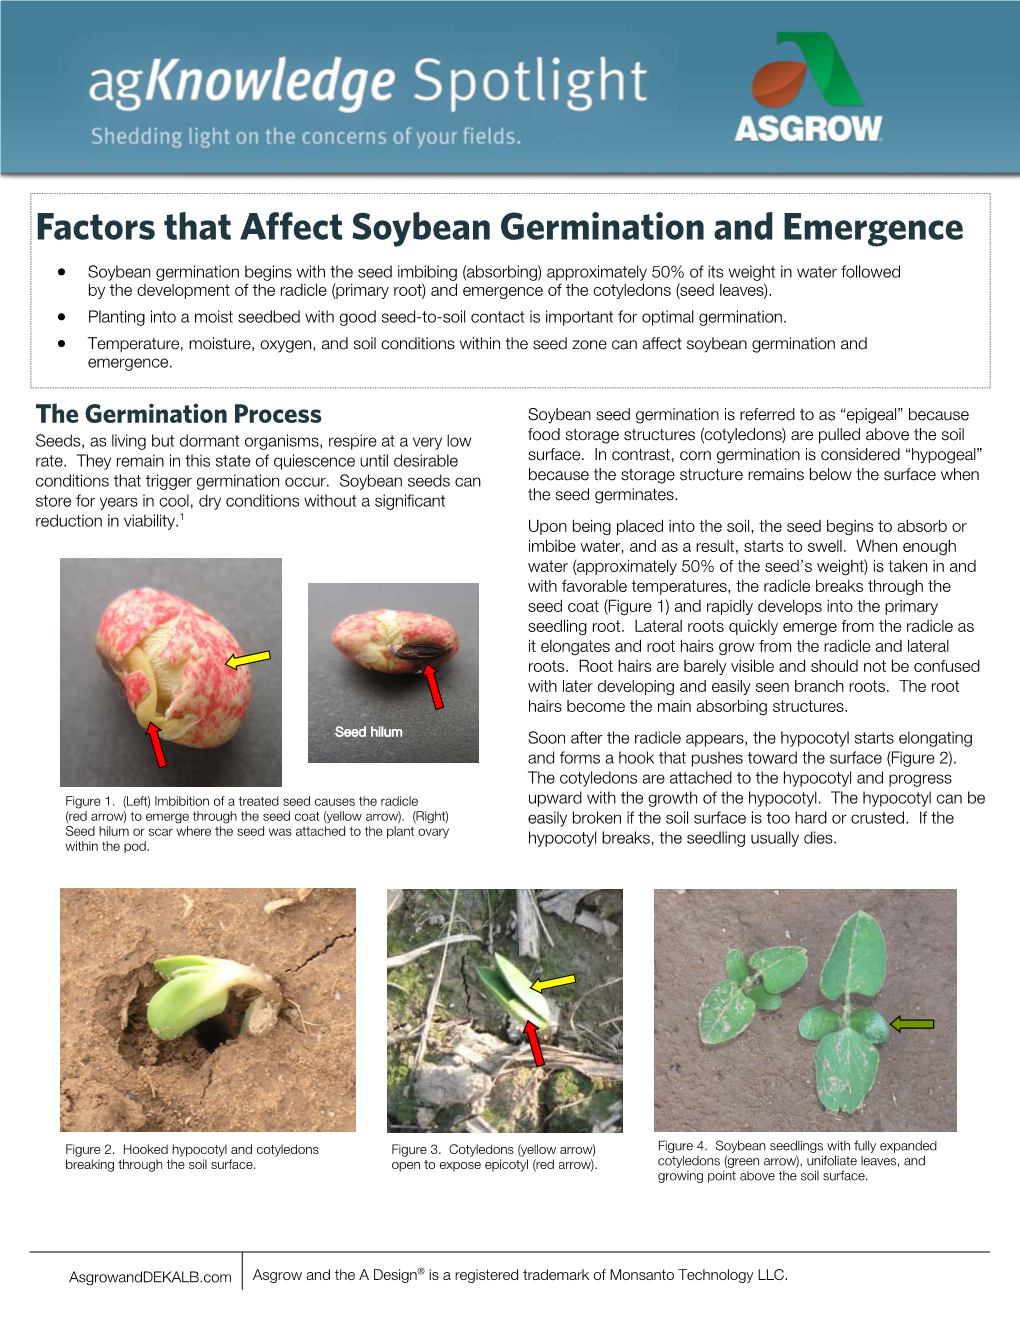 Factors That Affect Soybean Germination and Emergence